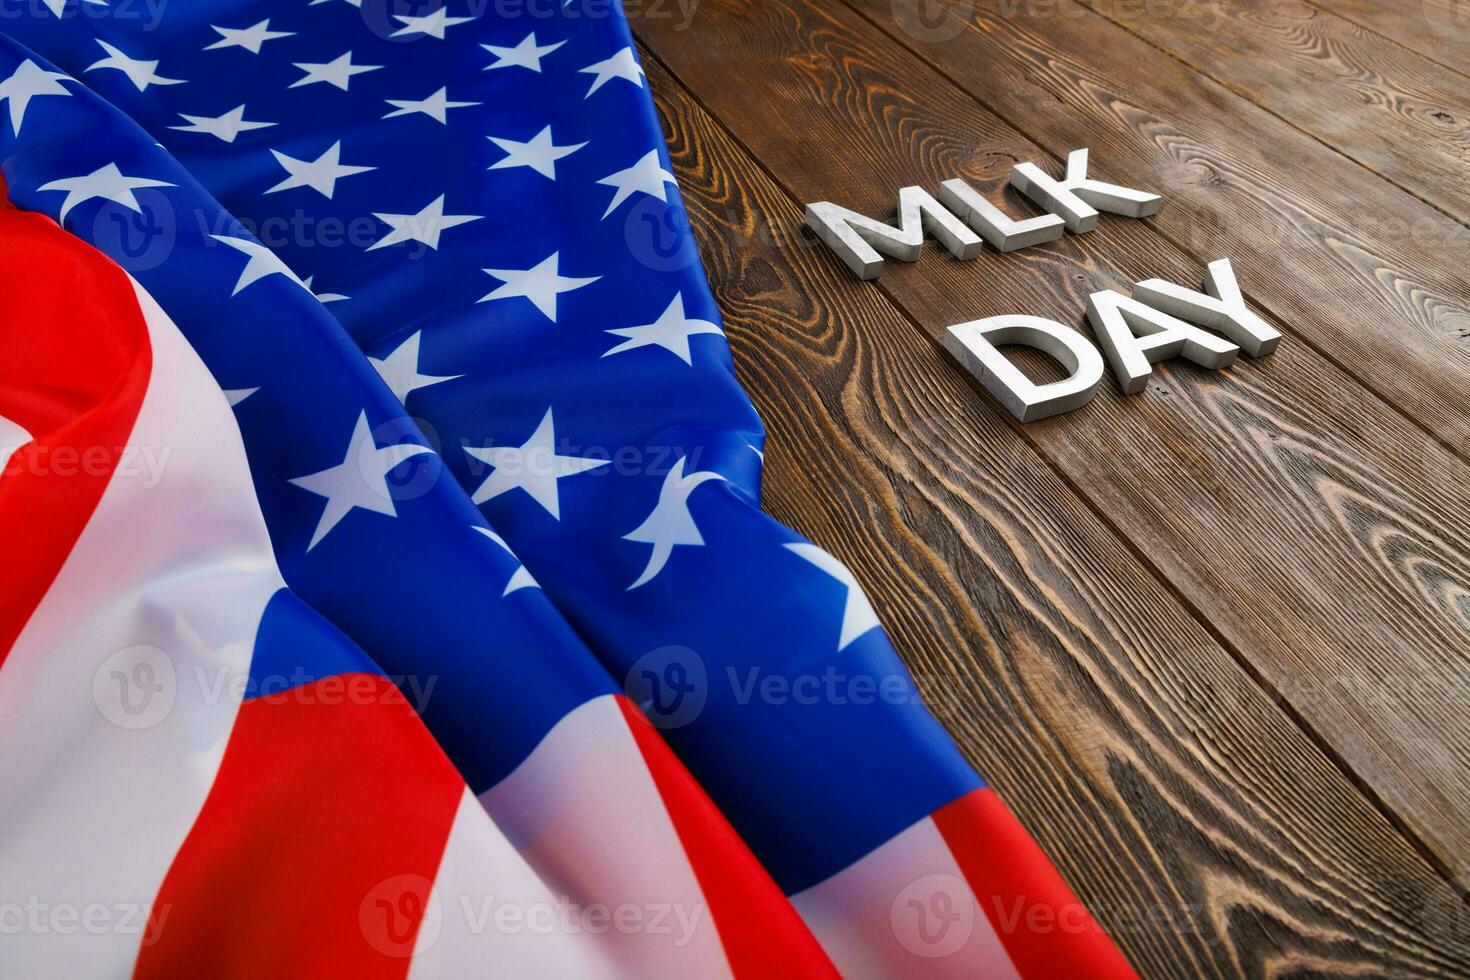 the word MLK day laid with silver metal letters on wooden surface with crumpled USA flag at left side photo